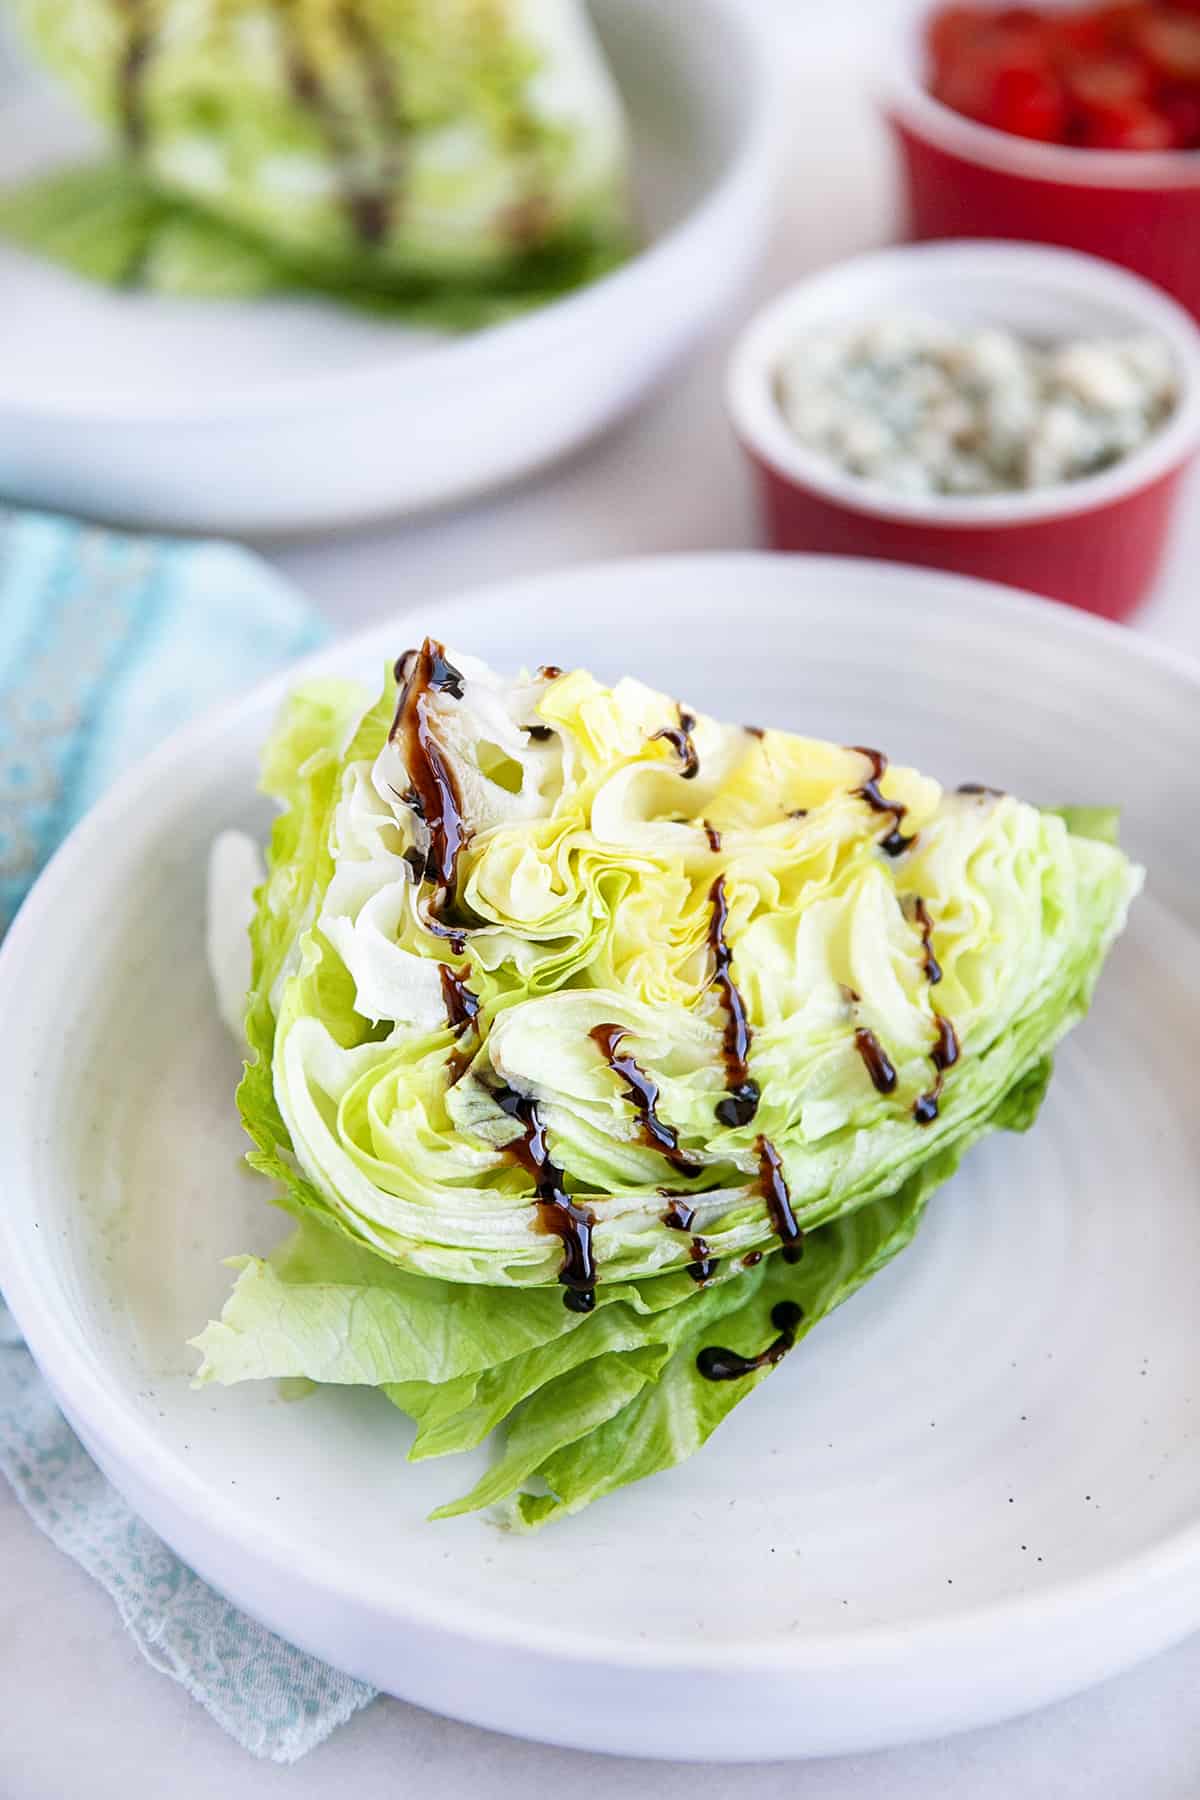 Lettuce drizzled with balsamic vinegar reduction. 